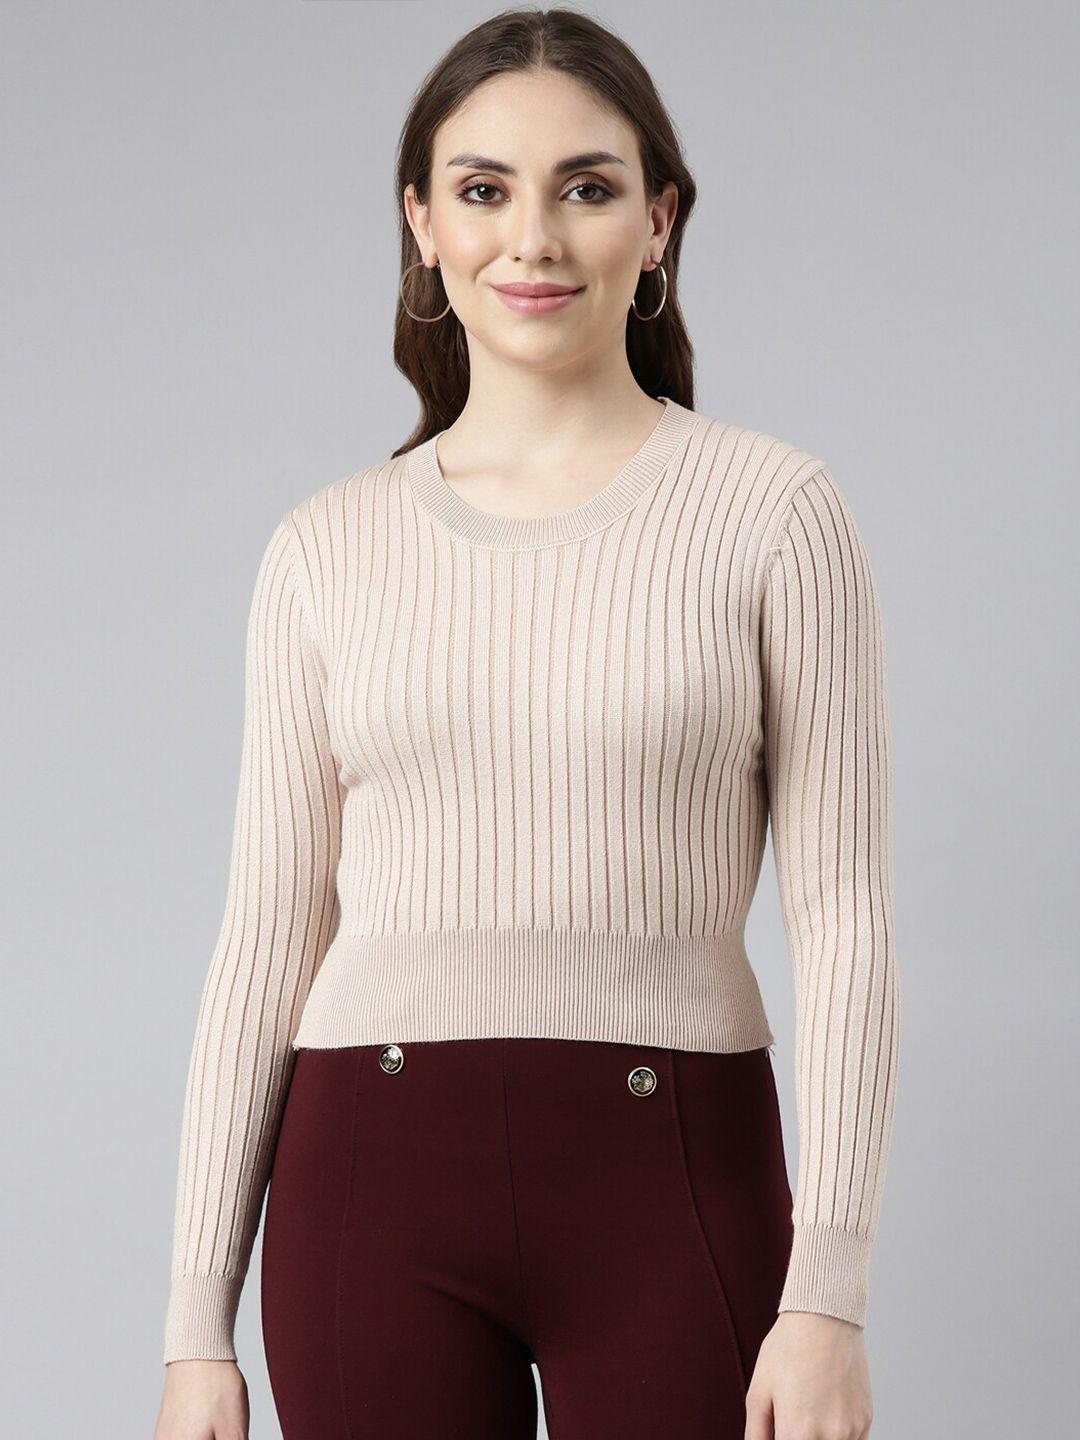 showoff-striped-round-neck-fitted-top